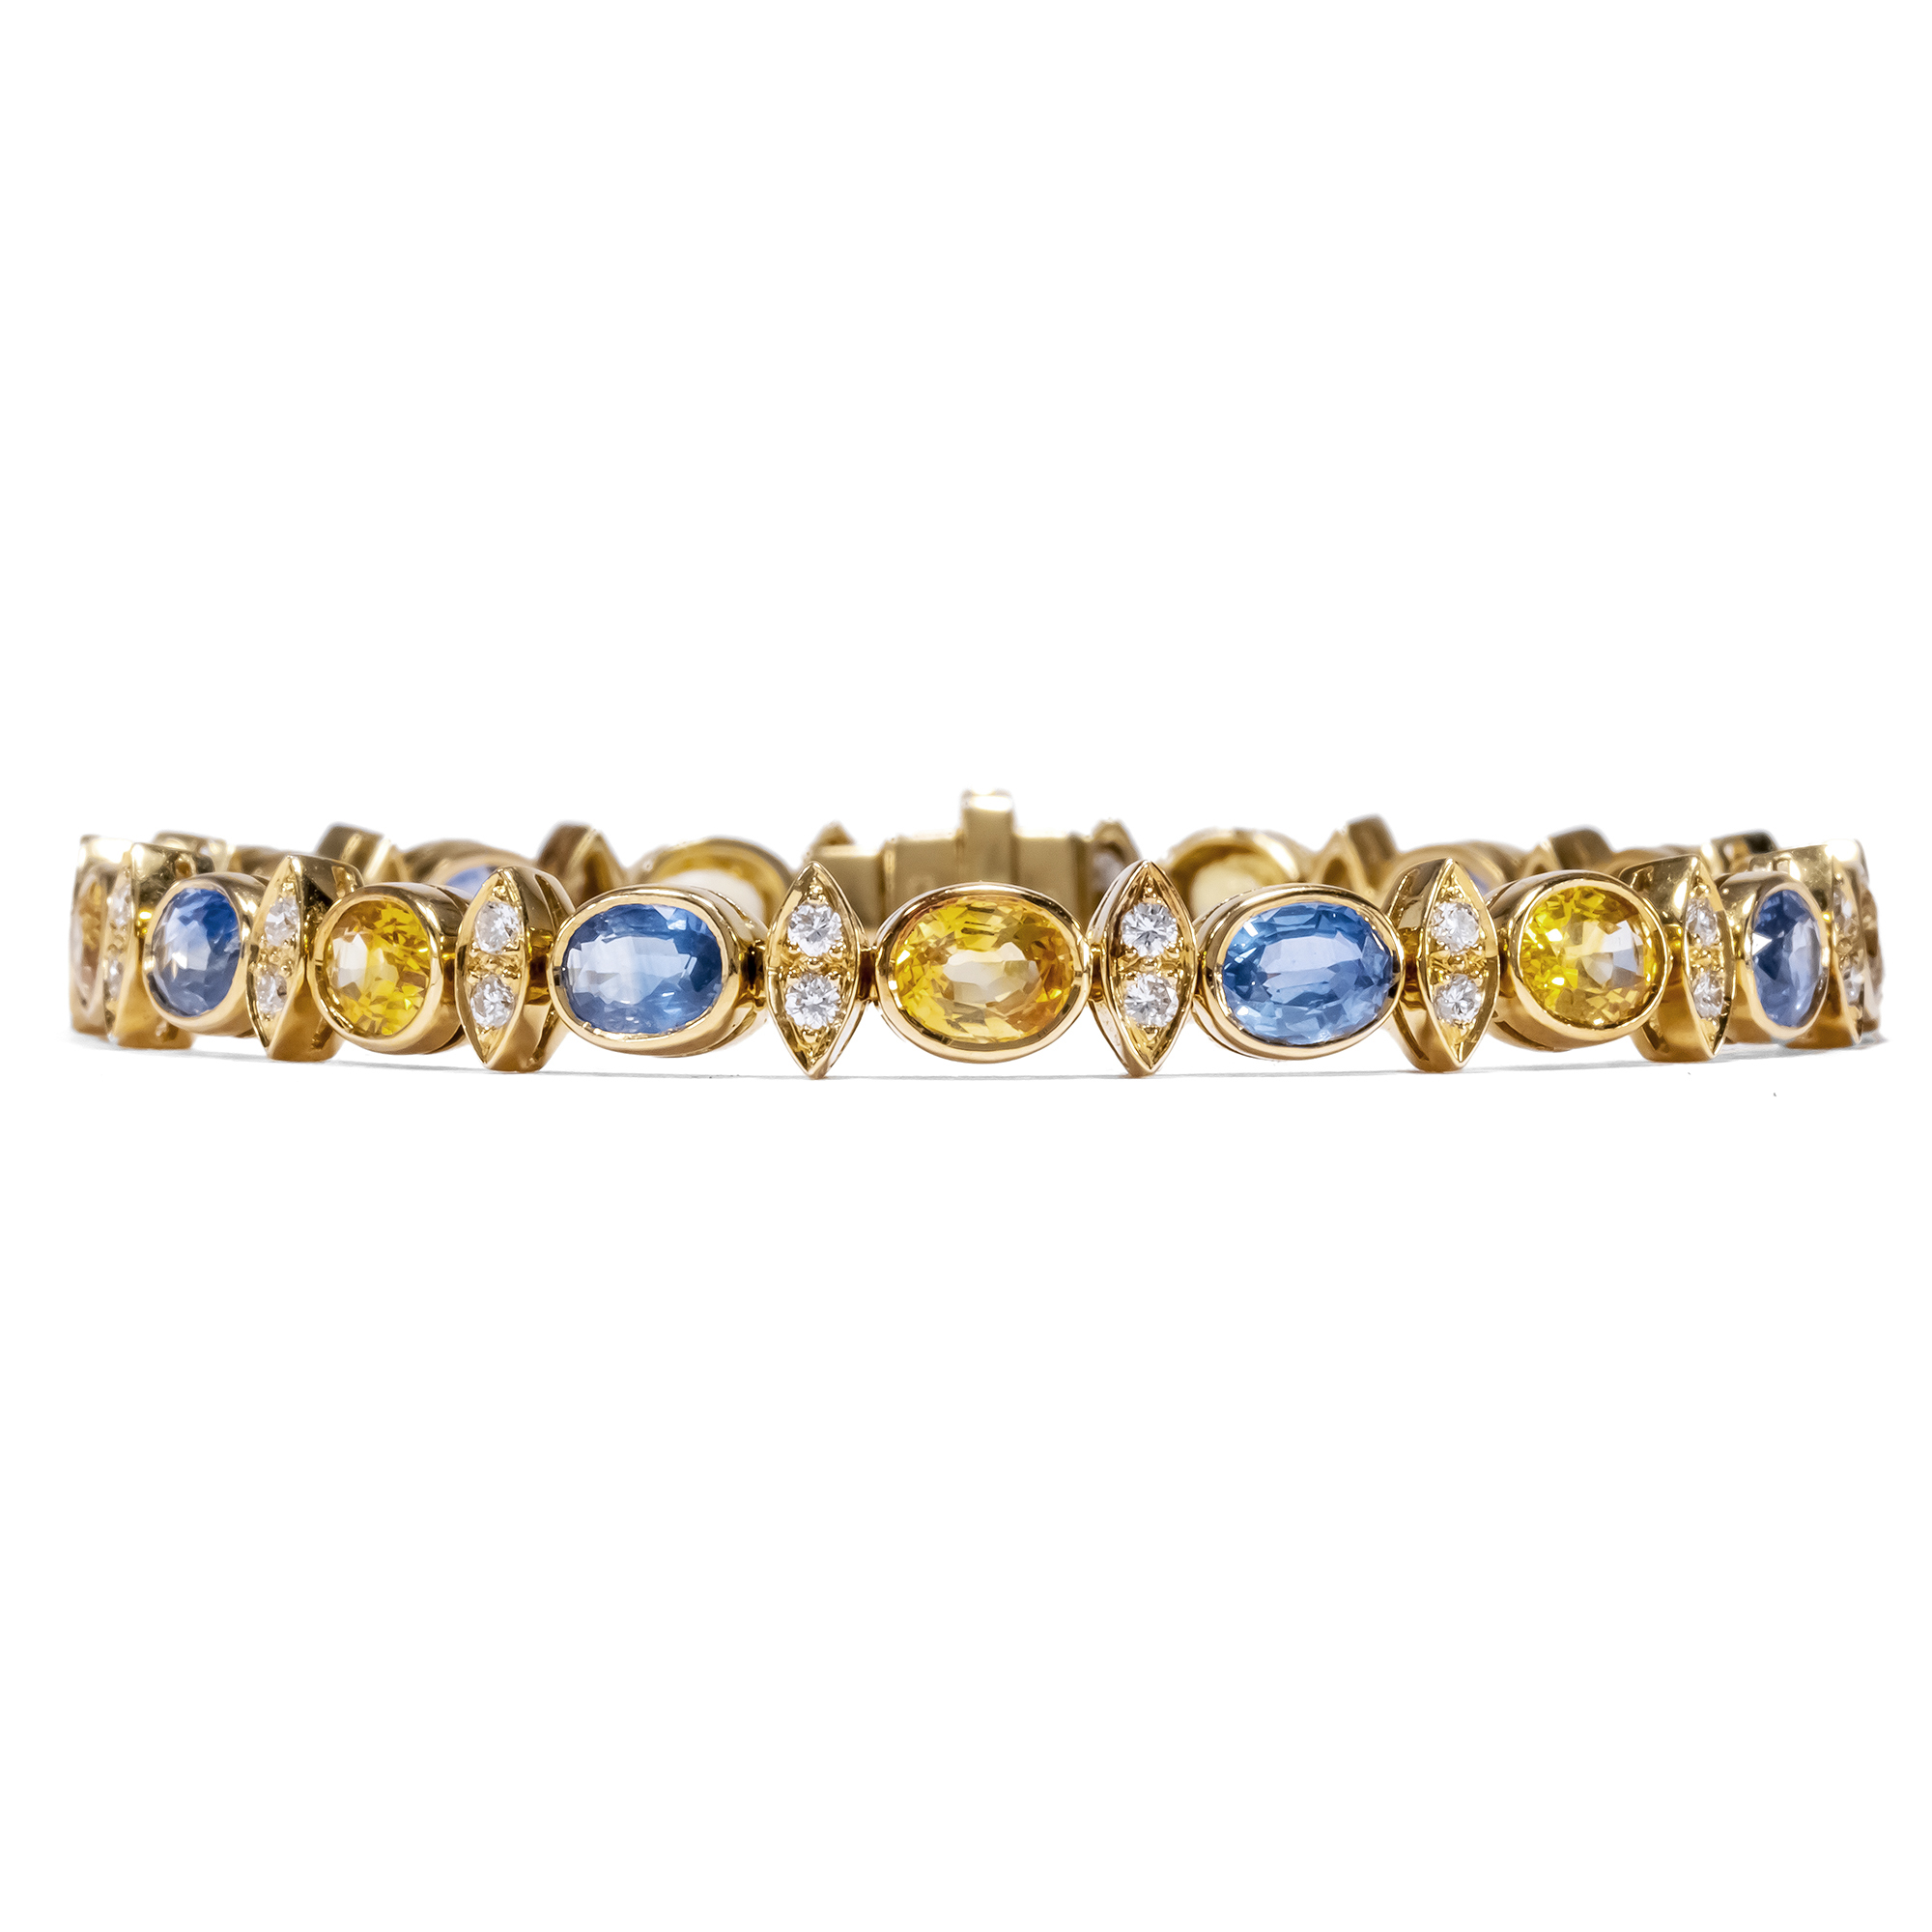 Vintage Gold Bracelet With Yellow & Blue Sapphires, ca. 1990